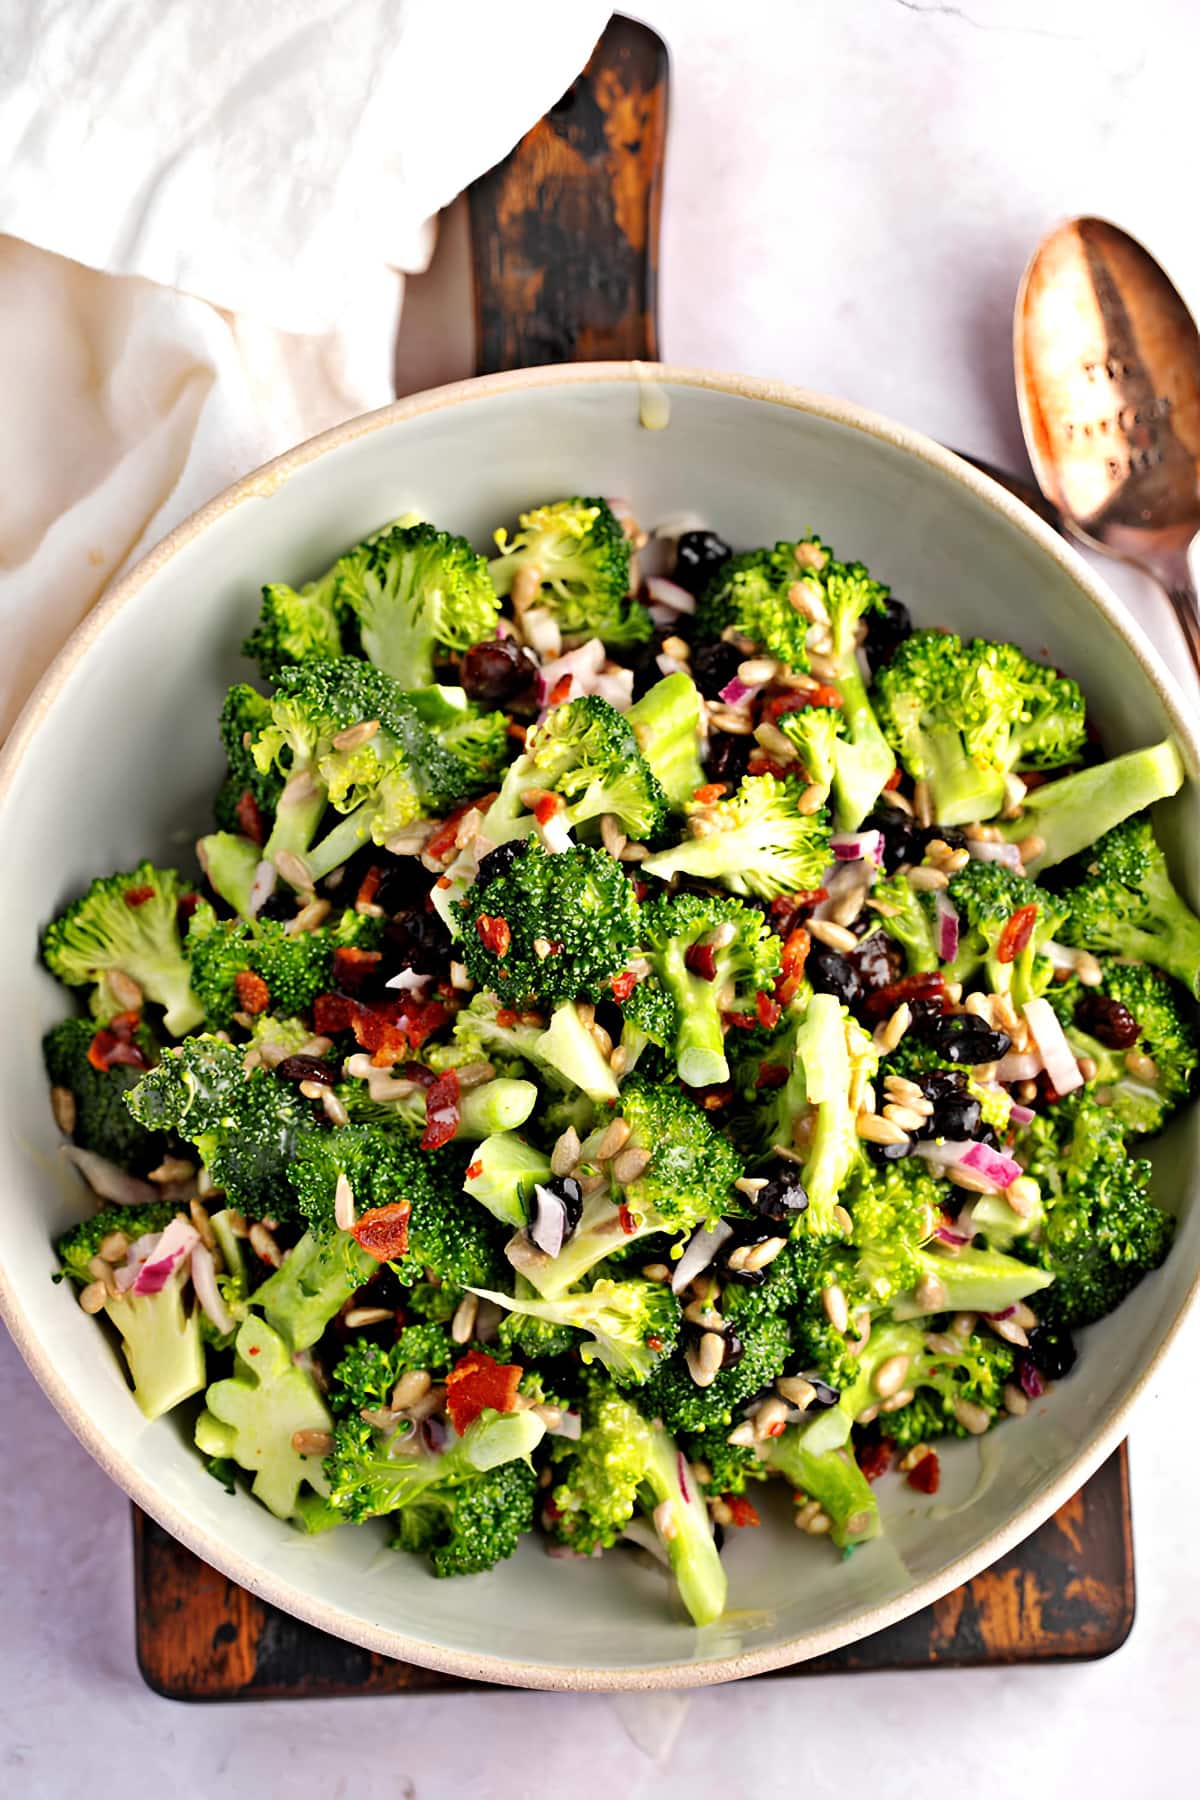 Top View of Healthy and Crunchy Broccoli Raisin salad with Sesame Seeds, Bacon, Onions, and Creamy Dressing in a Bowl